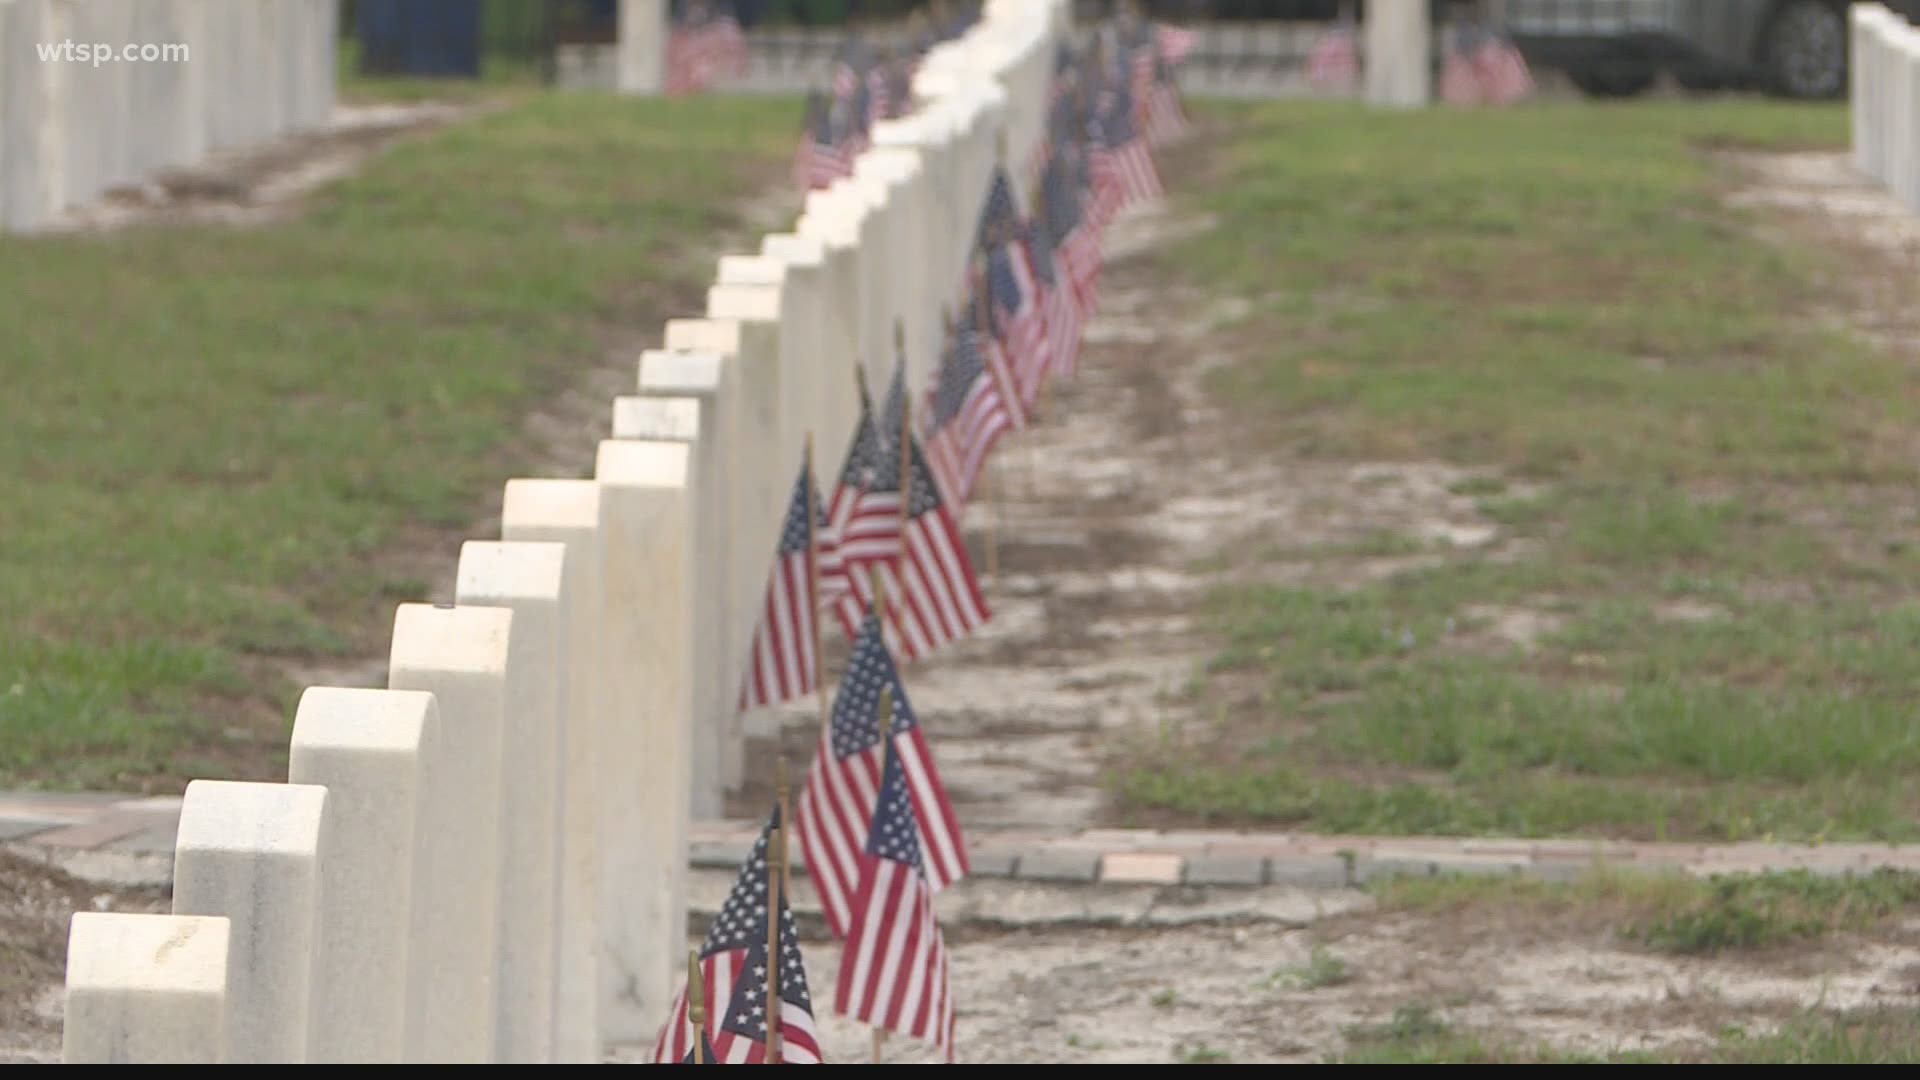 10 Tampa Bay photojournalist Albert Gamboa show you how the American Legion in Tampa honored our fallen heroes.